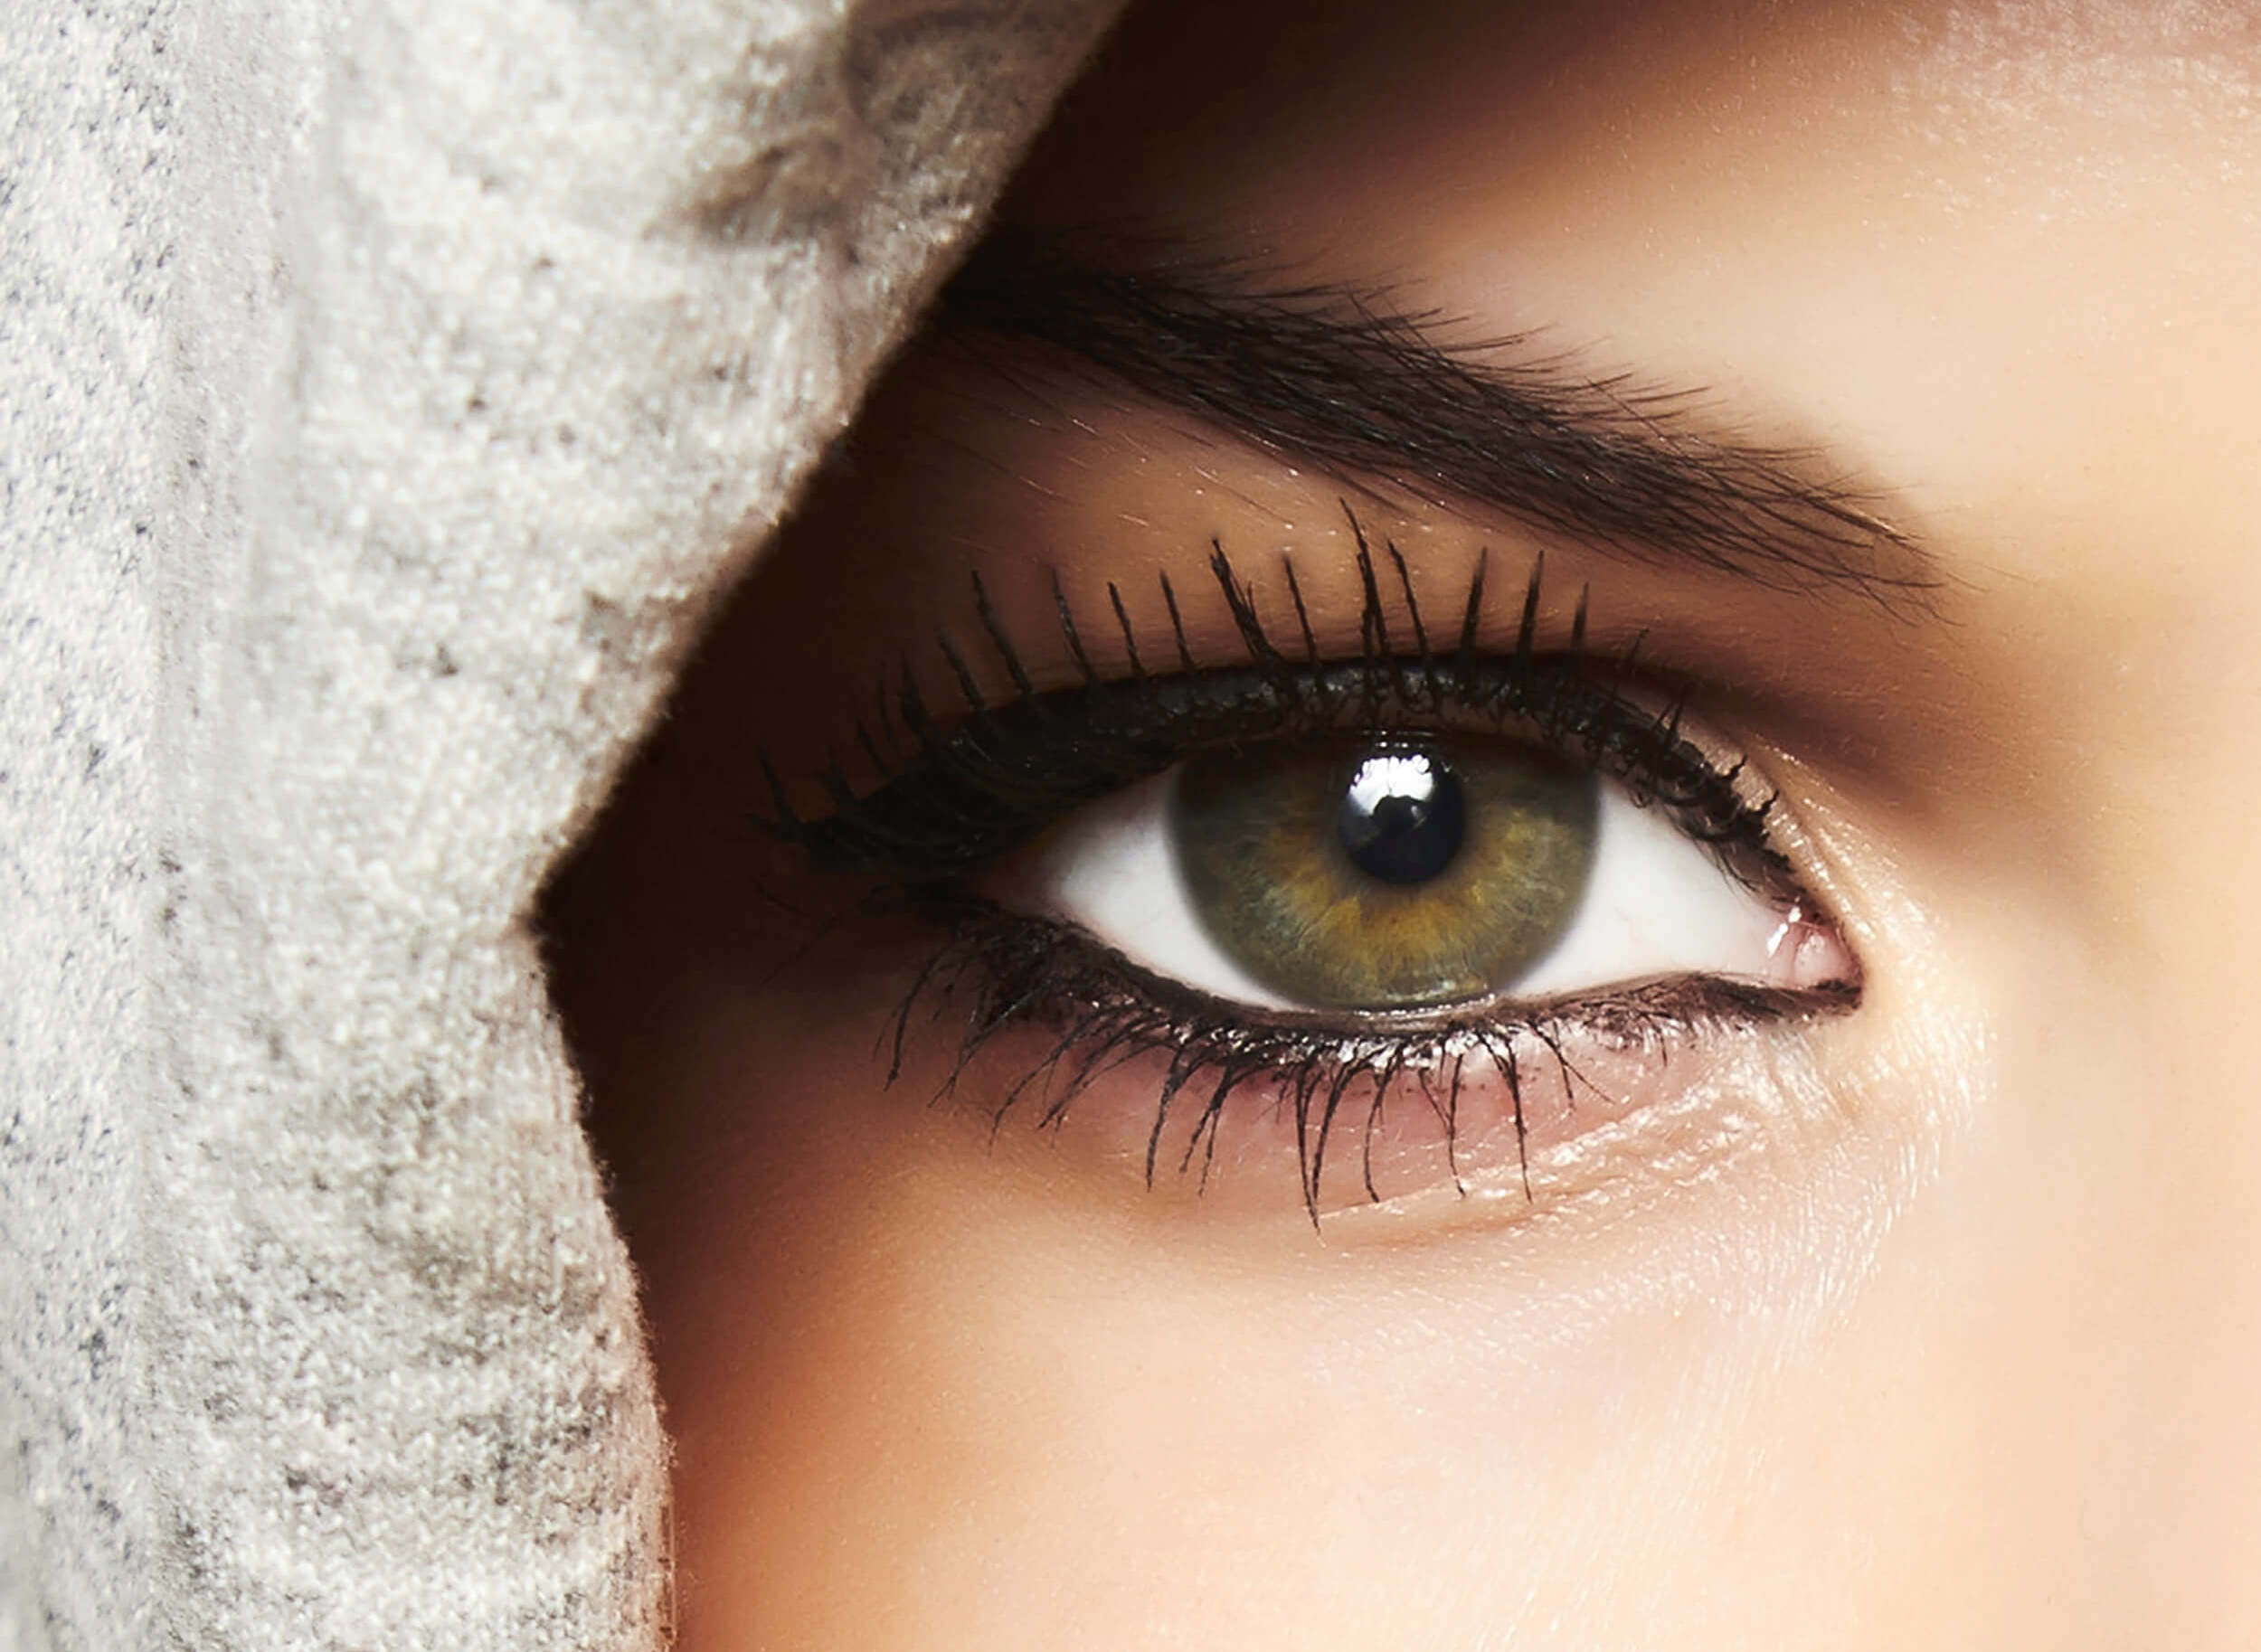 Best Makeup Eyes The Best Makeup Ideas For Hooded Eyes The Value Place